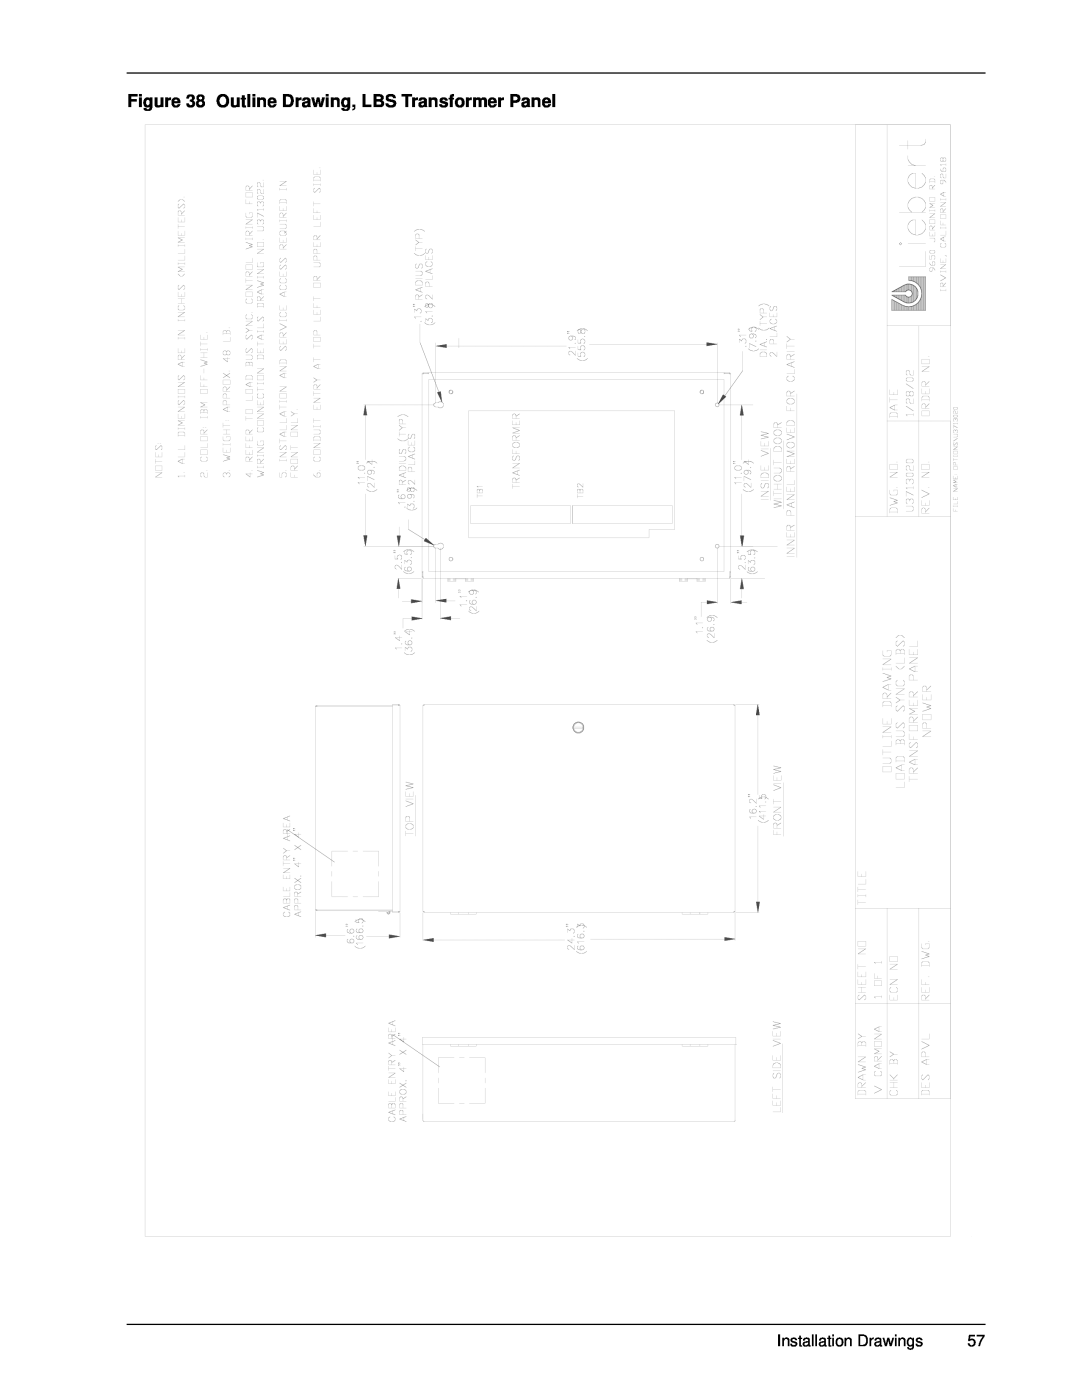 Emerson 30-130 kVA installation manual Outline Drawing, LBS Transformer Panel, Installation Drawings 